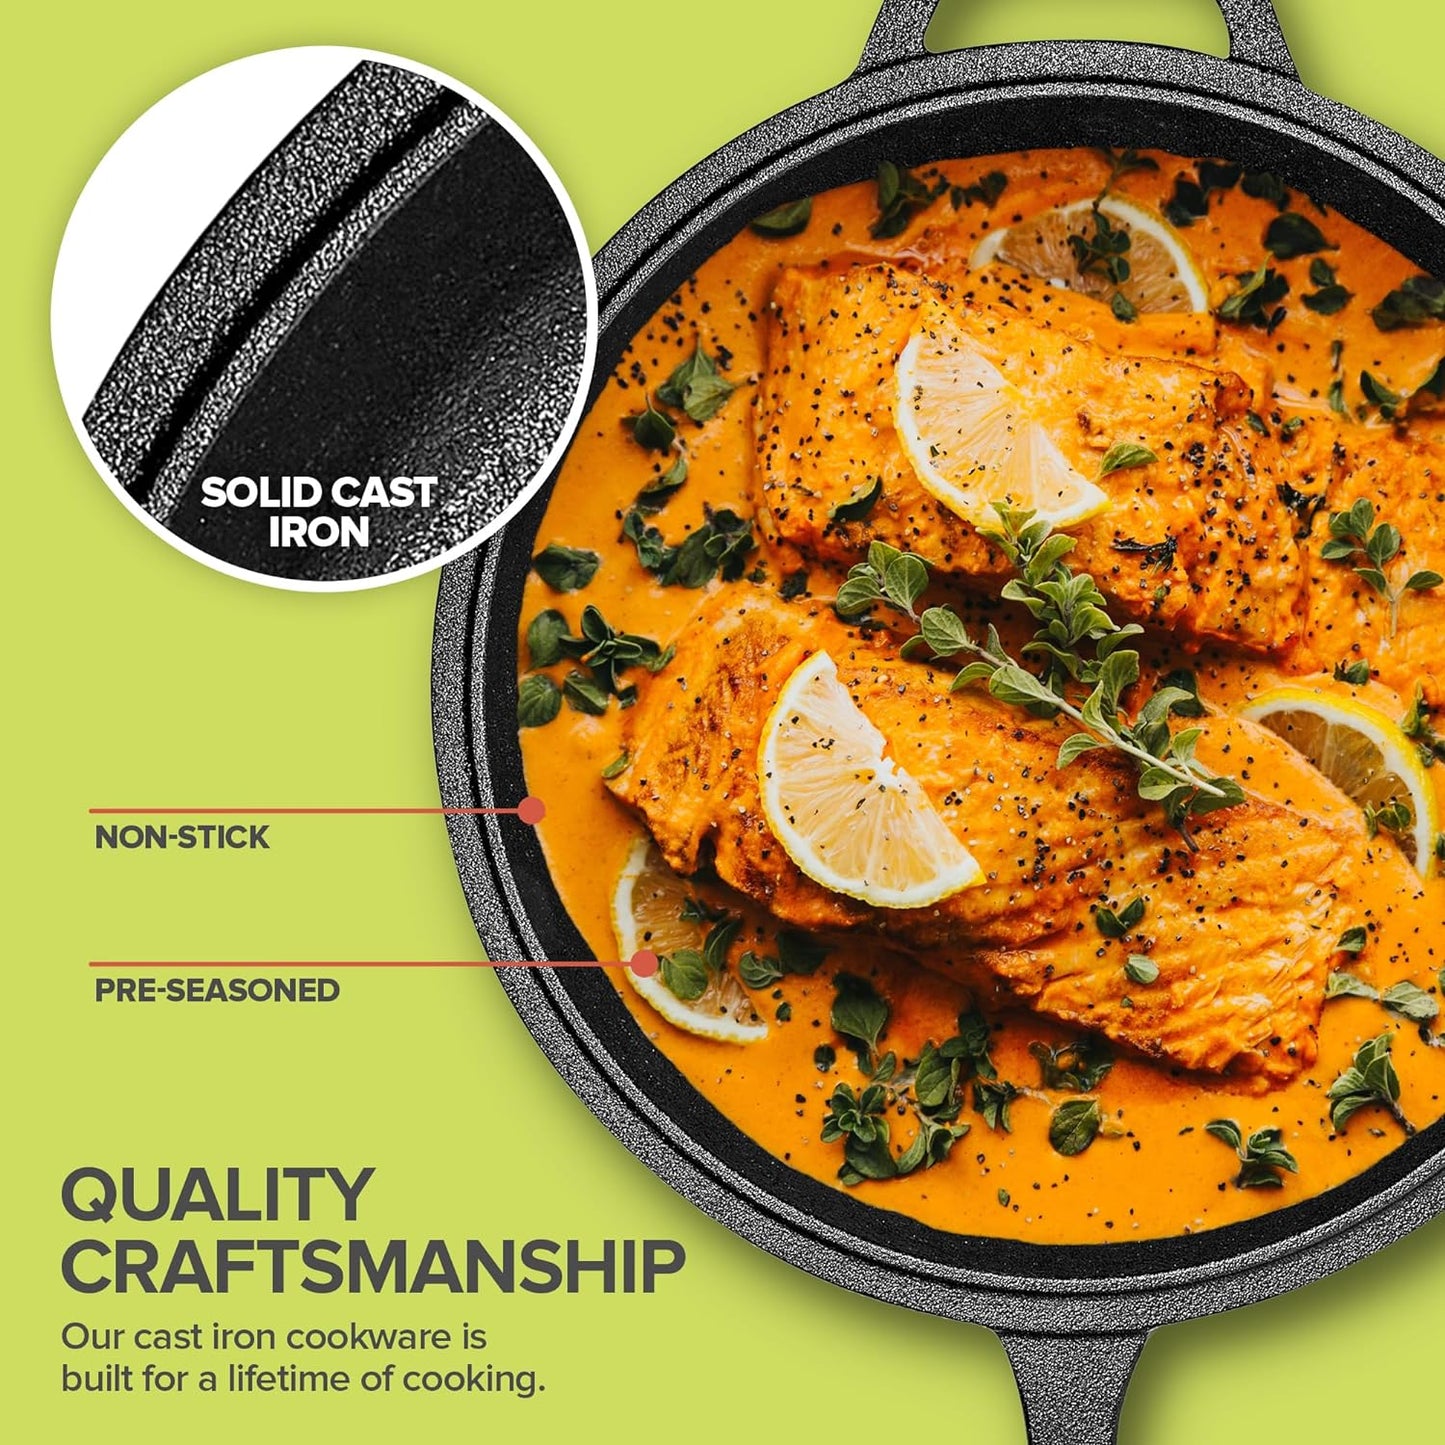 2-In-1 Dutch Oven, Cast Iron Pan (3.2QT) and Cast Iron Skillet (1.6QT) Combo, Cast Iron Pan with Lid, Preseasoned Cast Iron Pots and Pans Set, RV or Lodge Camping Cast Iron Set